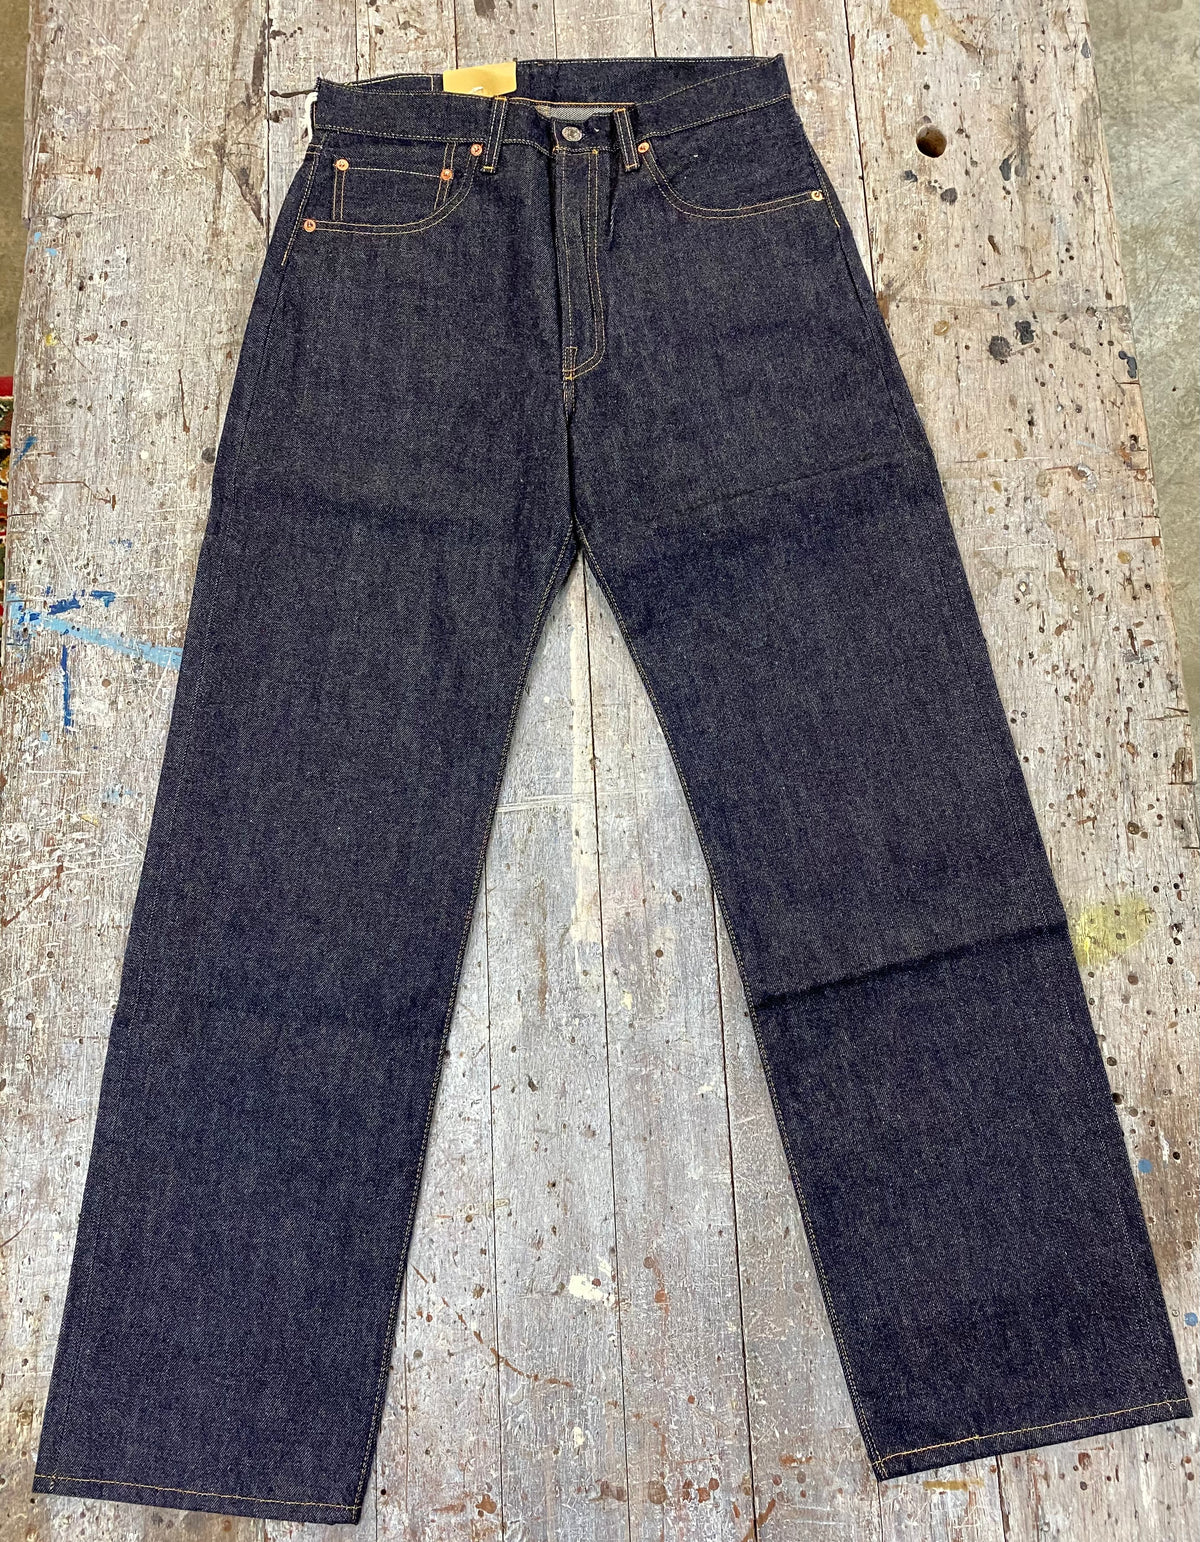 LEVIS VINTAGE CLOTHING 1955 501XX RAW SHRINK TO FIT